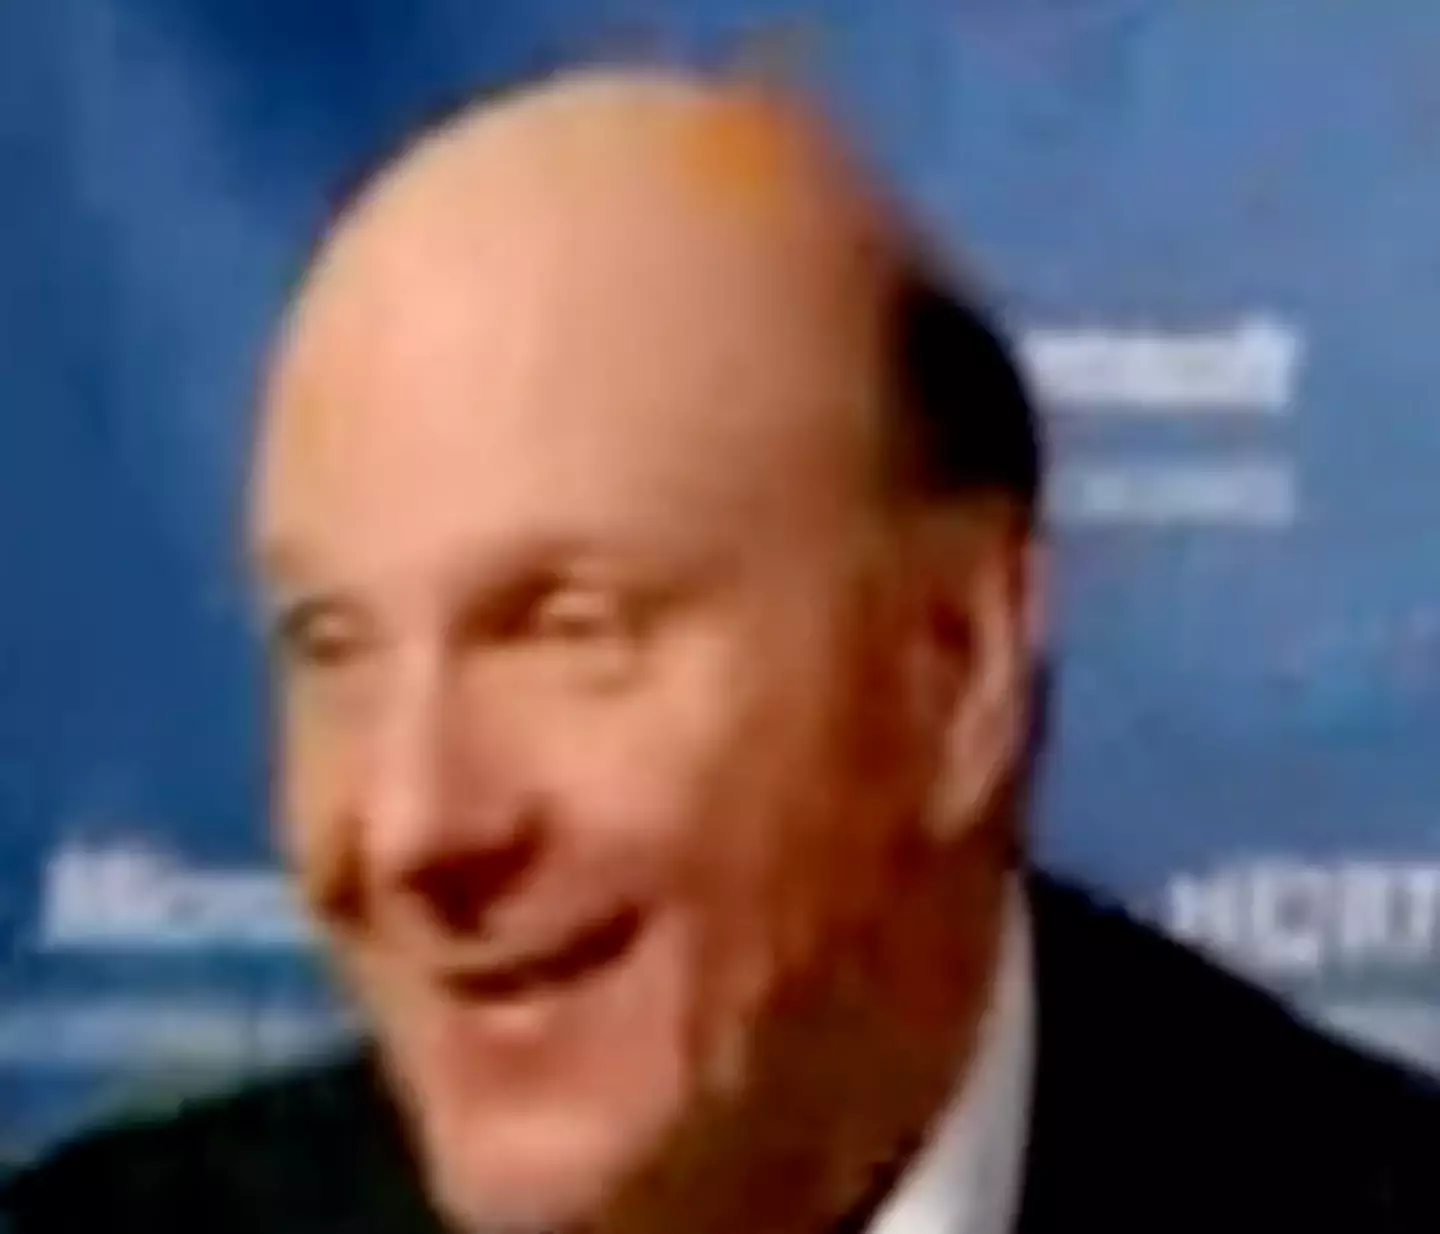 Michael Ballmer couldn't keep it together when he was asked about the iPhone launch.